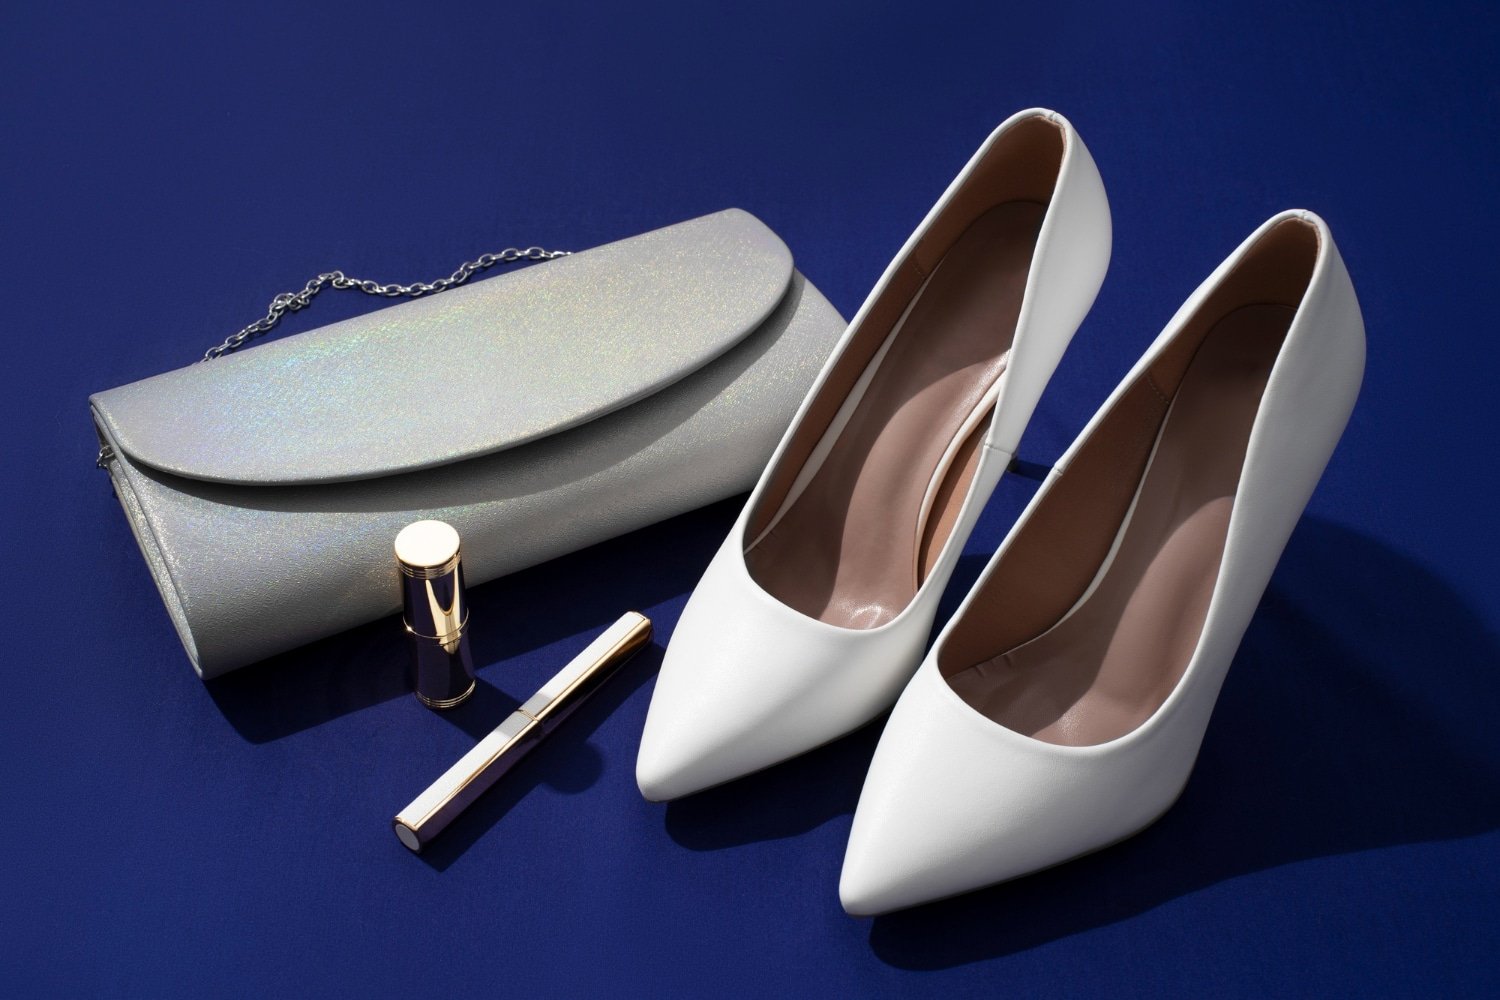 Kurt Geiger: The Latest in Luxury Footwear and Accessories